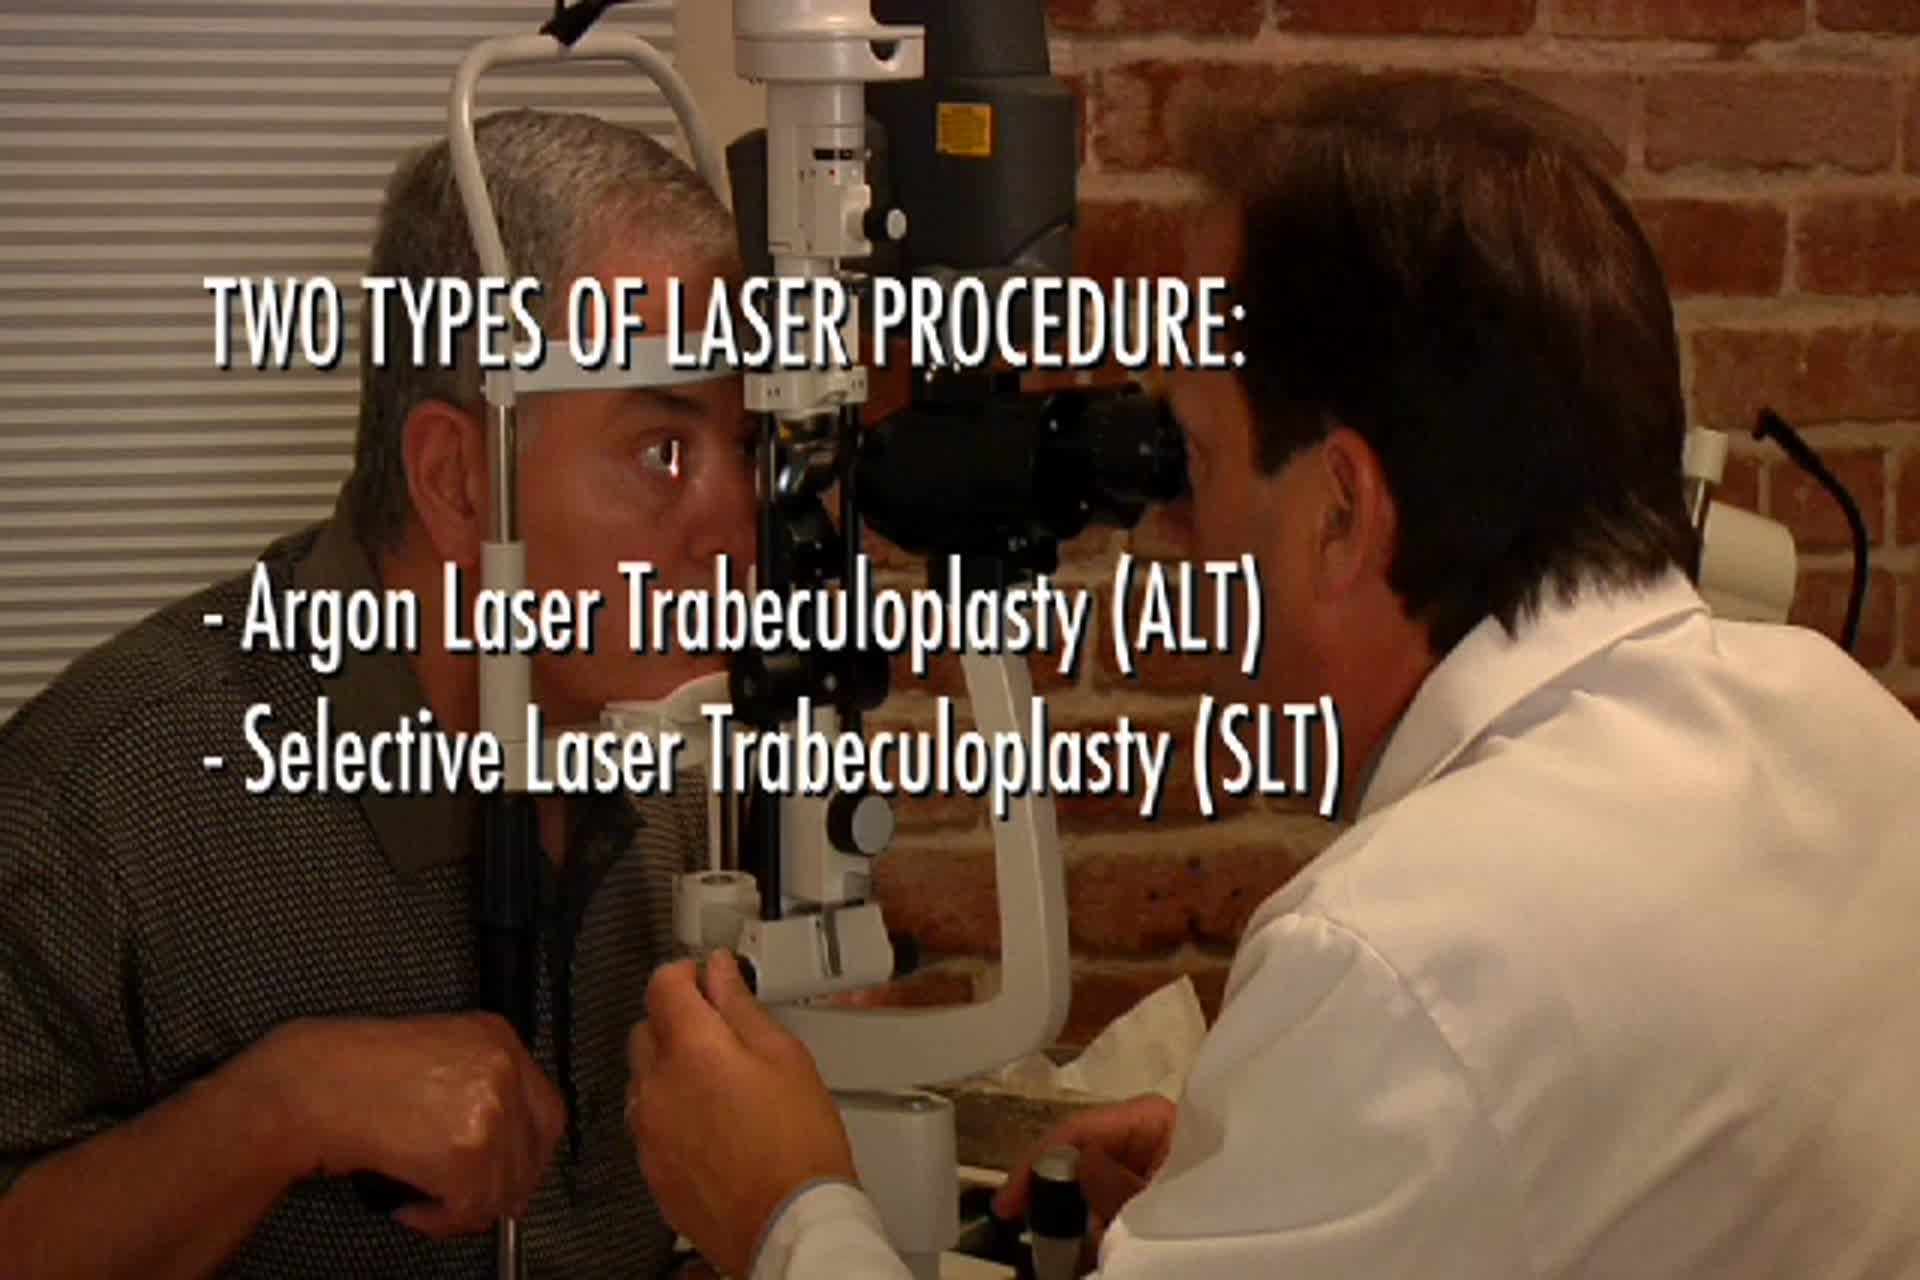 Glaucoma - What is laser surgery for treatment of glaucoma?